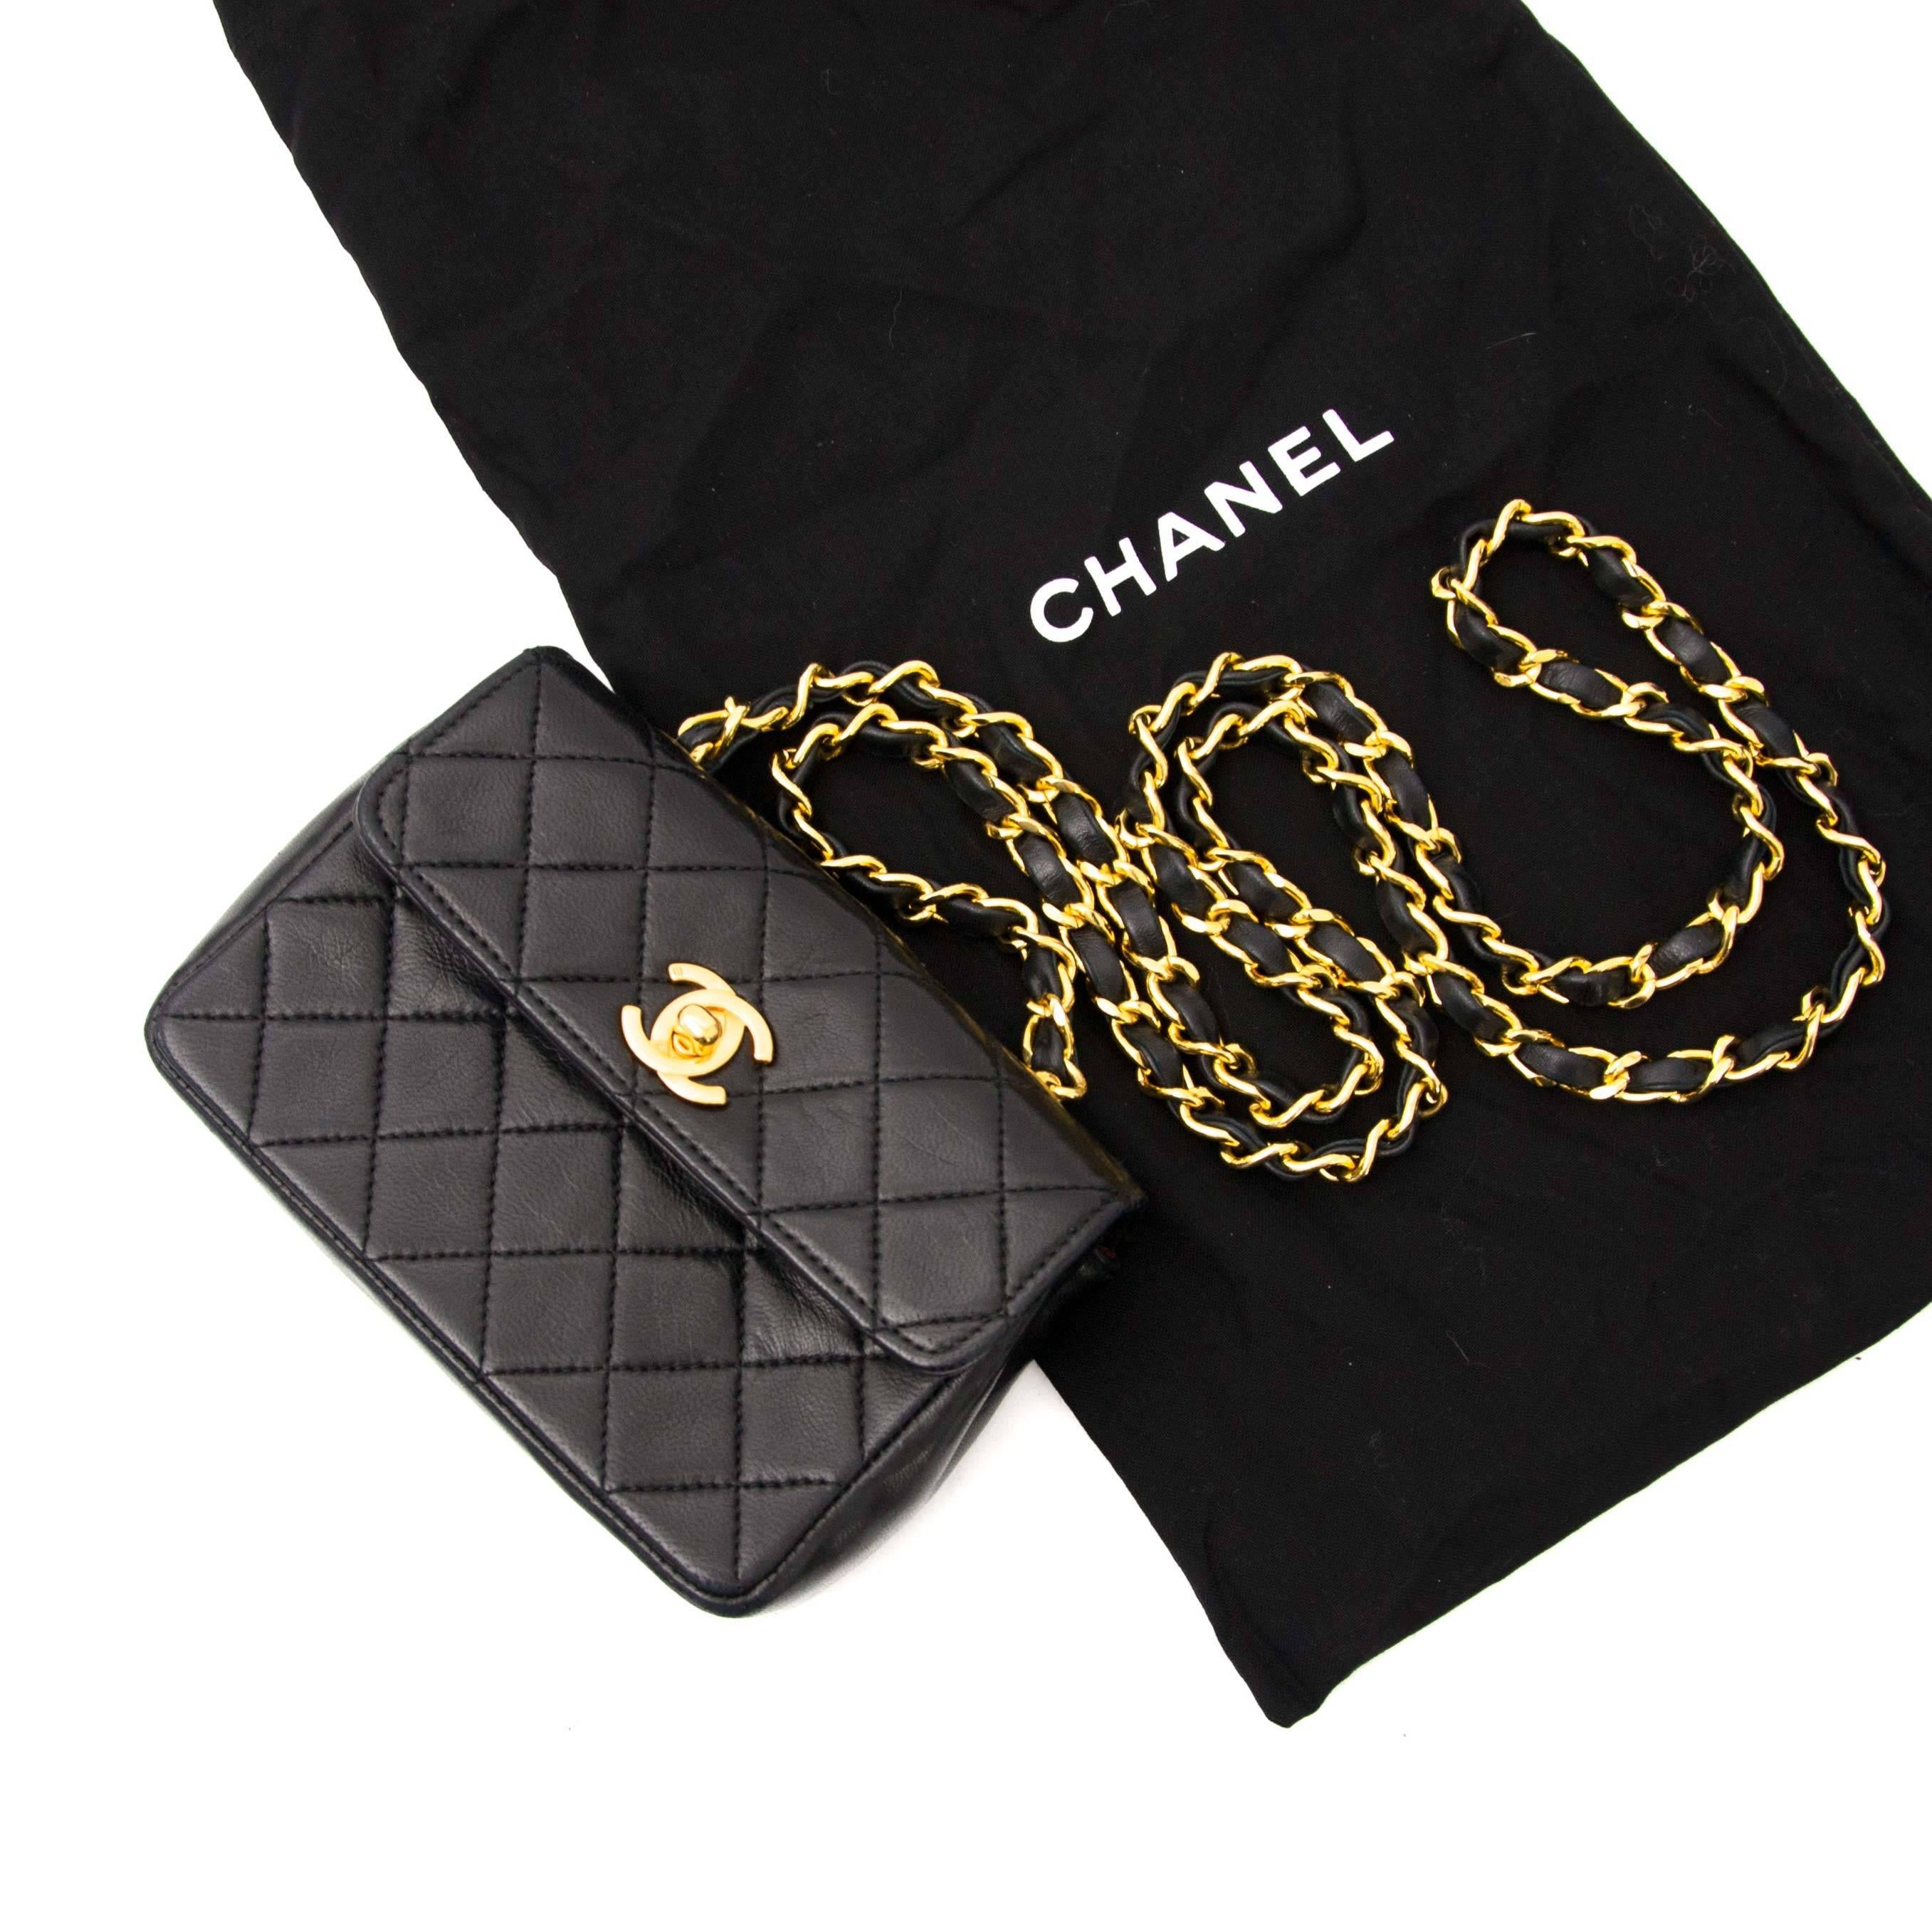 Chanel Vintage Mini Classic Flap Black Leather. Date code: 1419937. Model from 1989-1991. Excellent condition